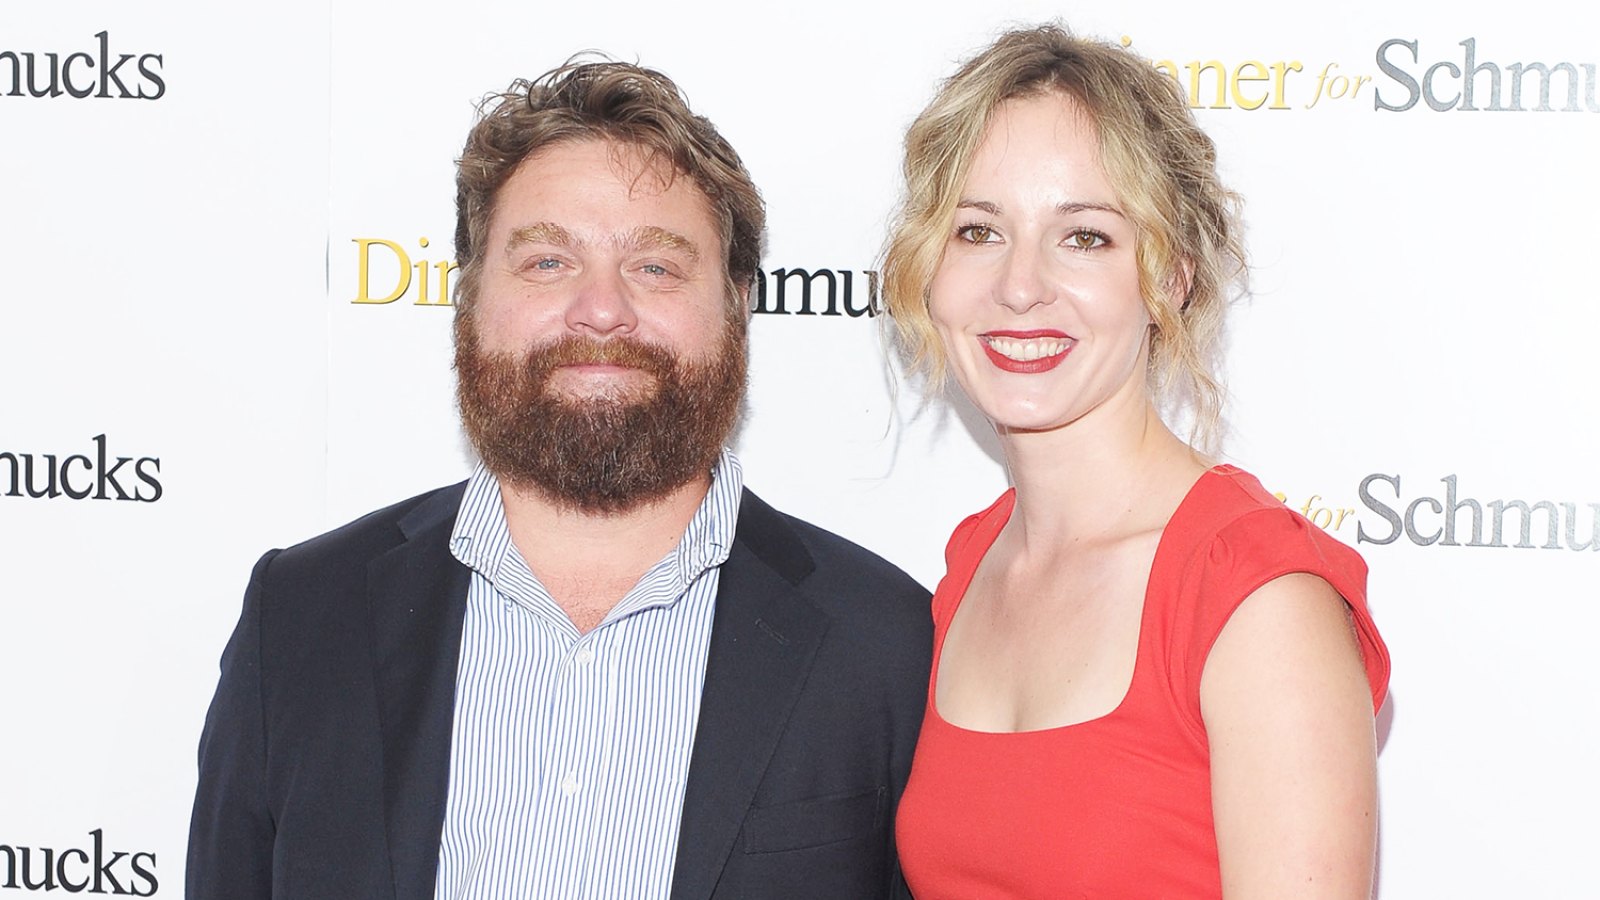 Actor Zach Galifianakis and Quinn Lundberg attend the "Dinner For Schmucks" premiere at the Ziegfeld Theatre on July 19, 2010 in New York City.